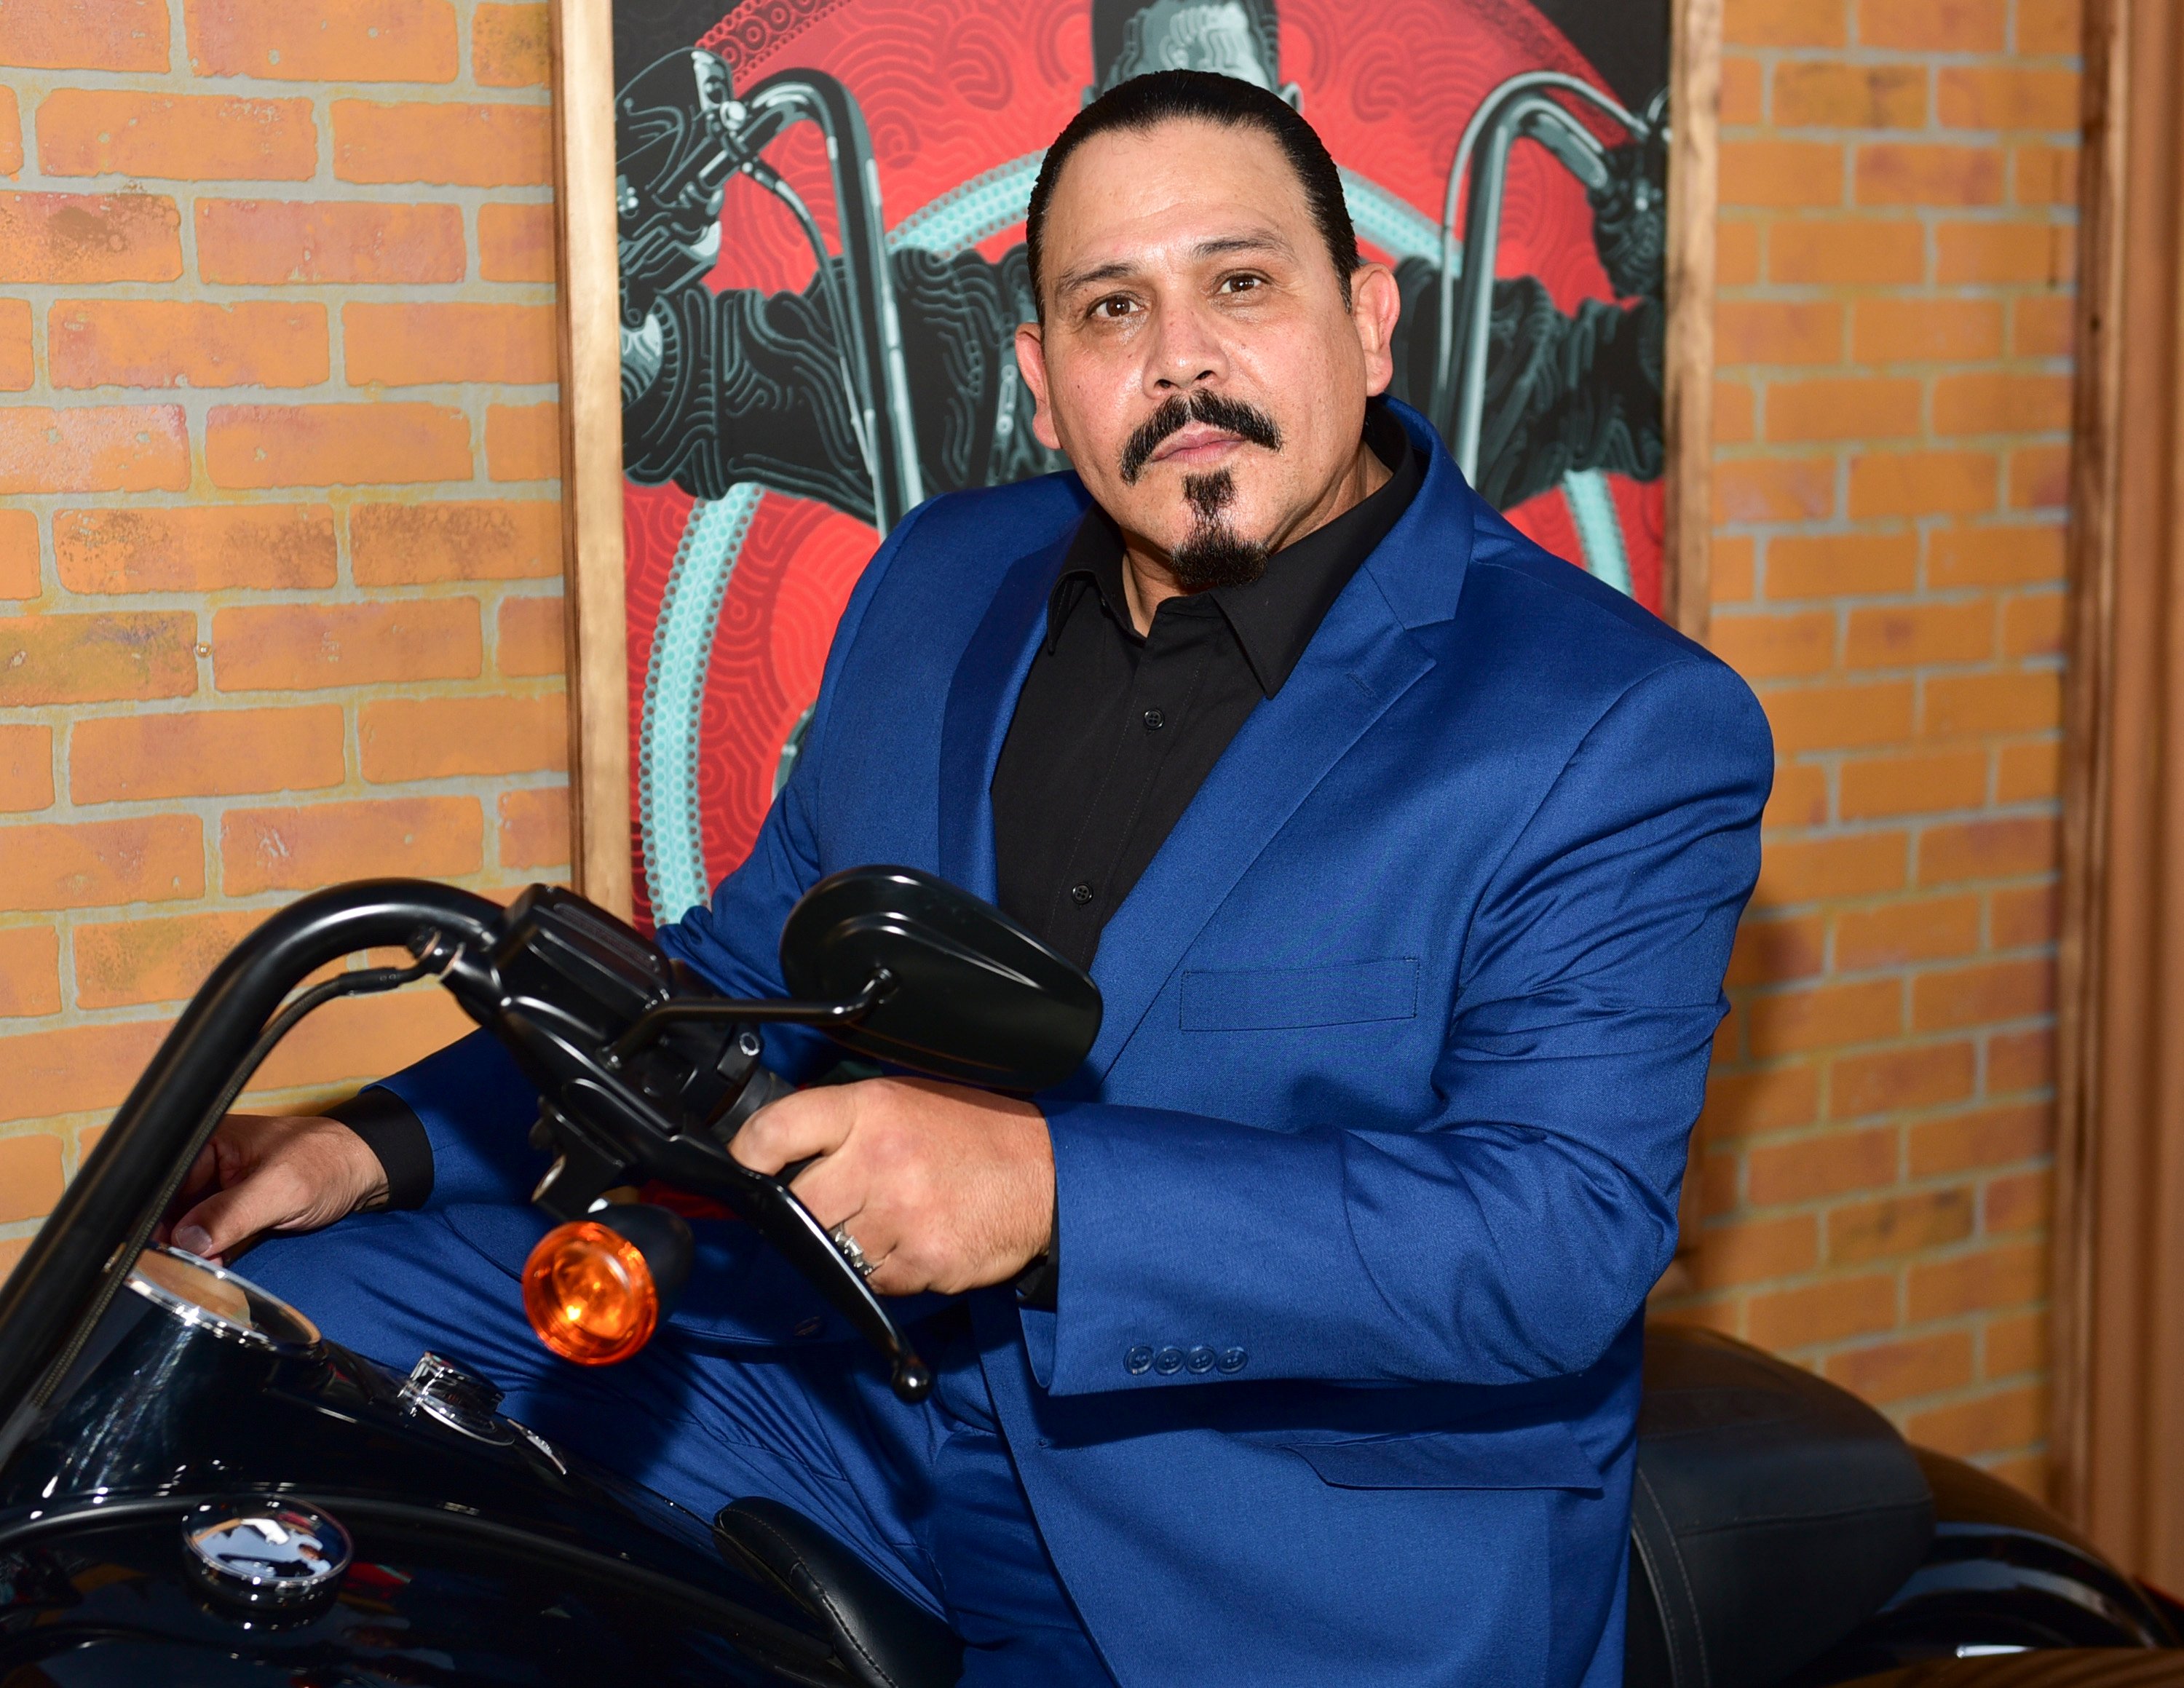 Emilio Rivera arrives at the premiere of FX's "Mayans M.C." at TCL Chinese Theatre on August 28, 2018